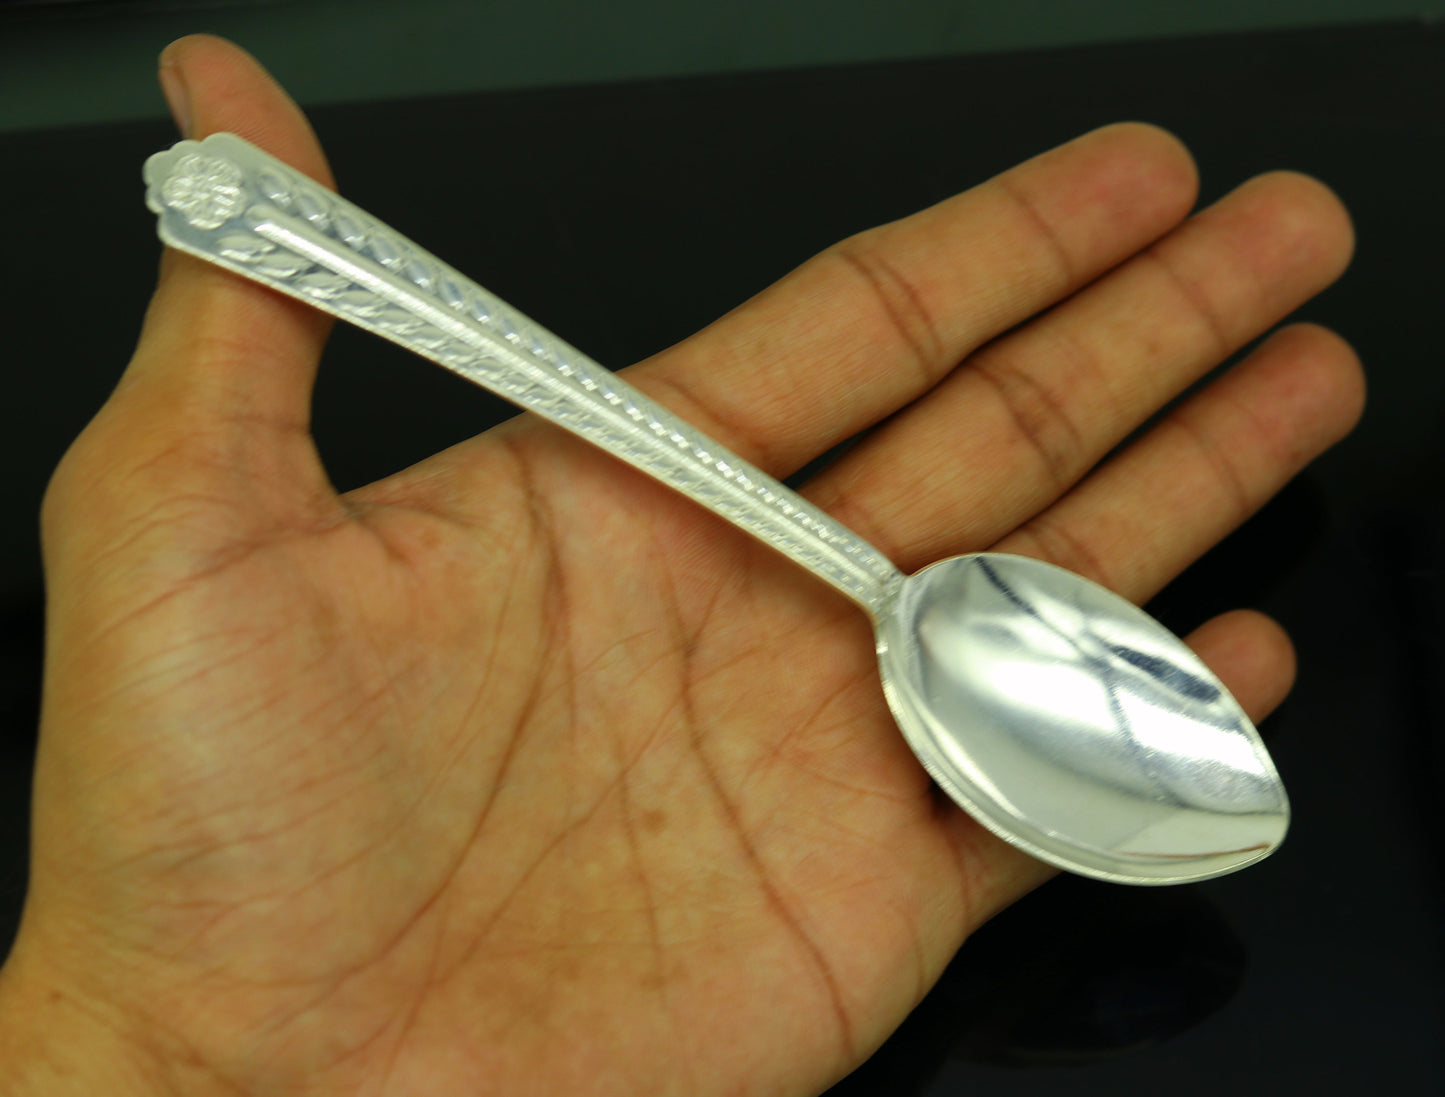 Pure sterling silver handmade solid silver 6" spoon kitchen utensils, vessels, silver has antibacterial properties, keep stay healthy sv58 - TRIBAL ORNAMENTS